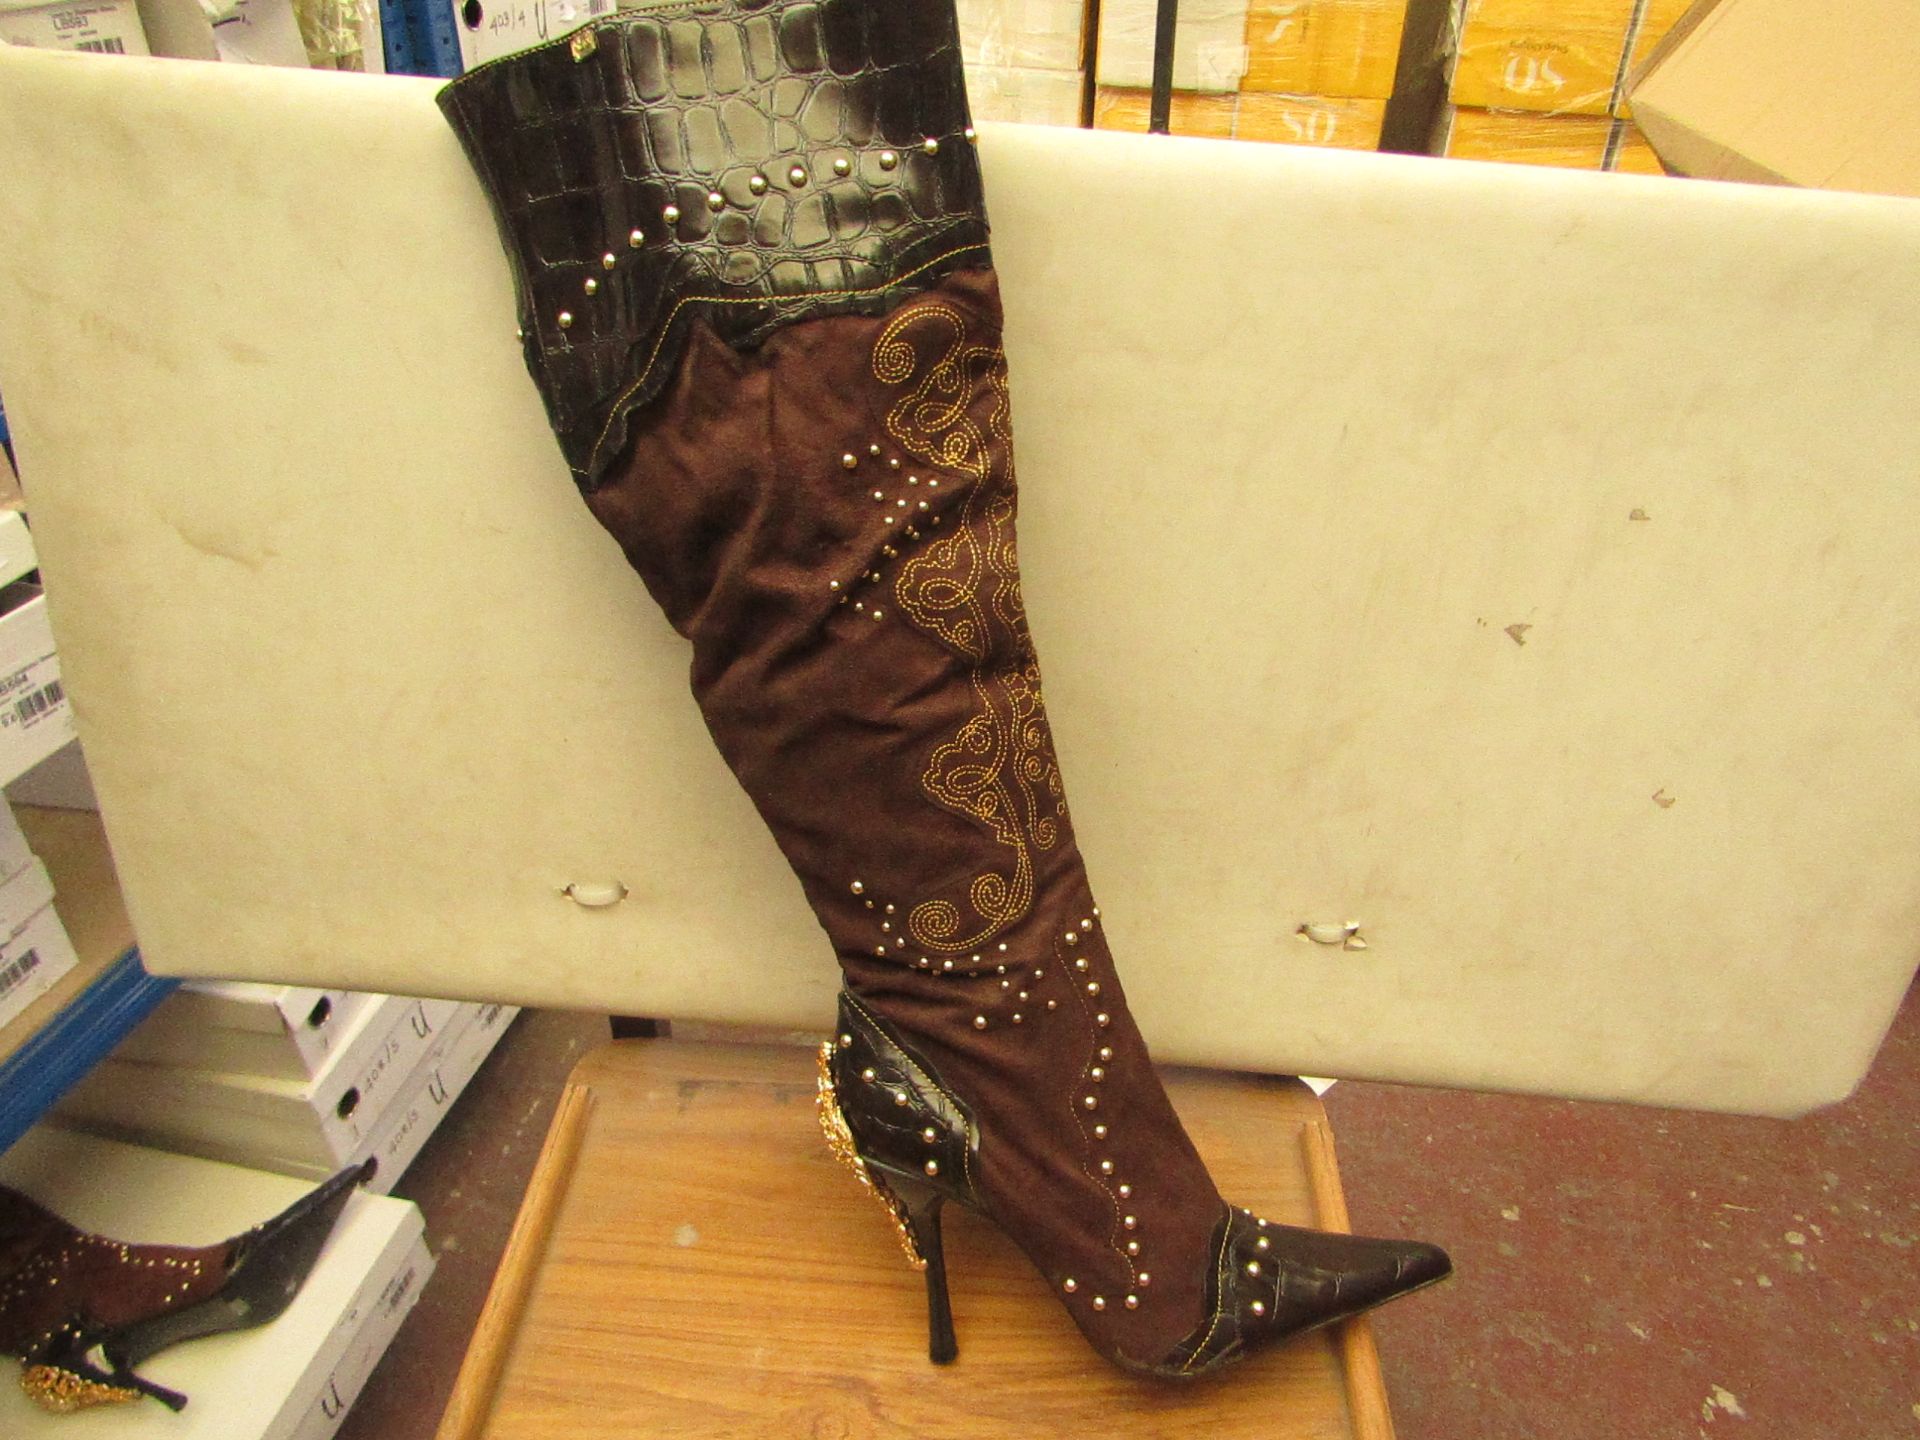 1 x Pair of Unze By Shalimar Boots. Size 6.New & Boxed. See Image For Design